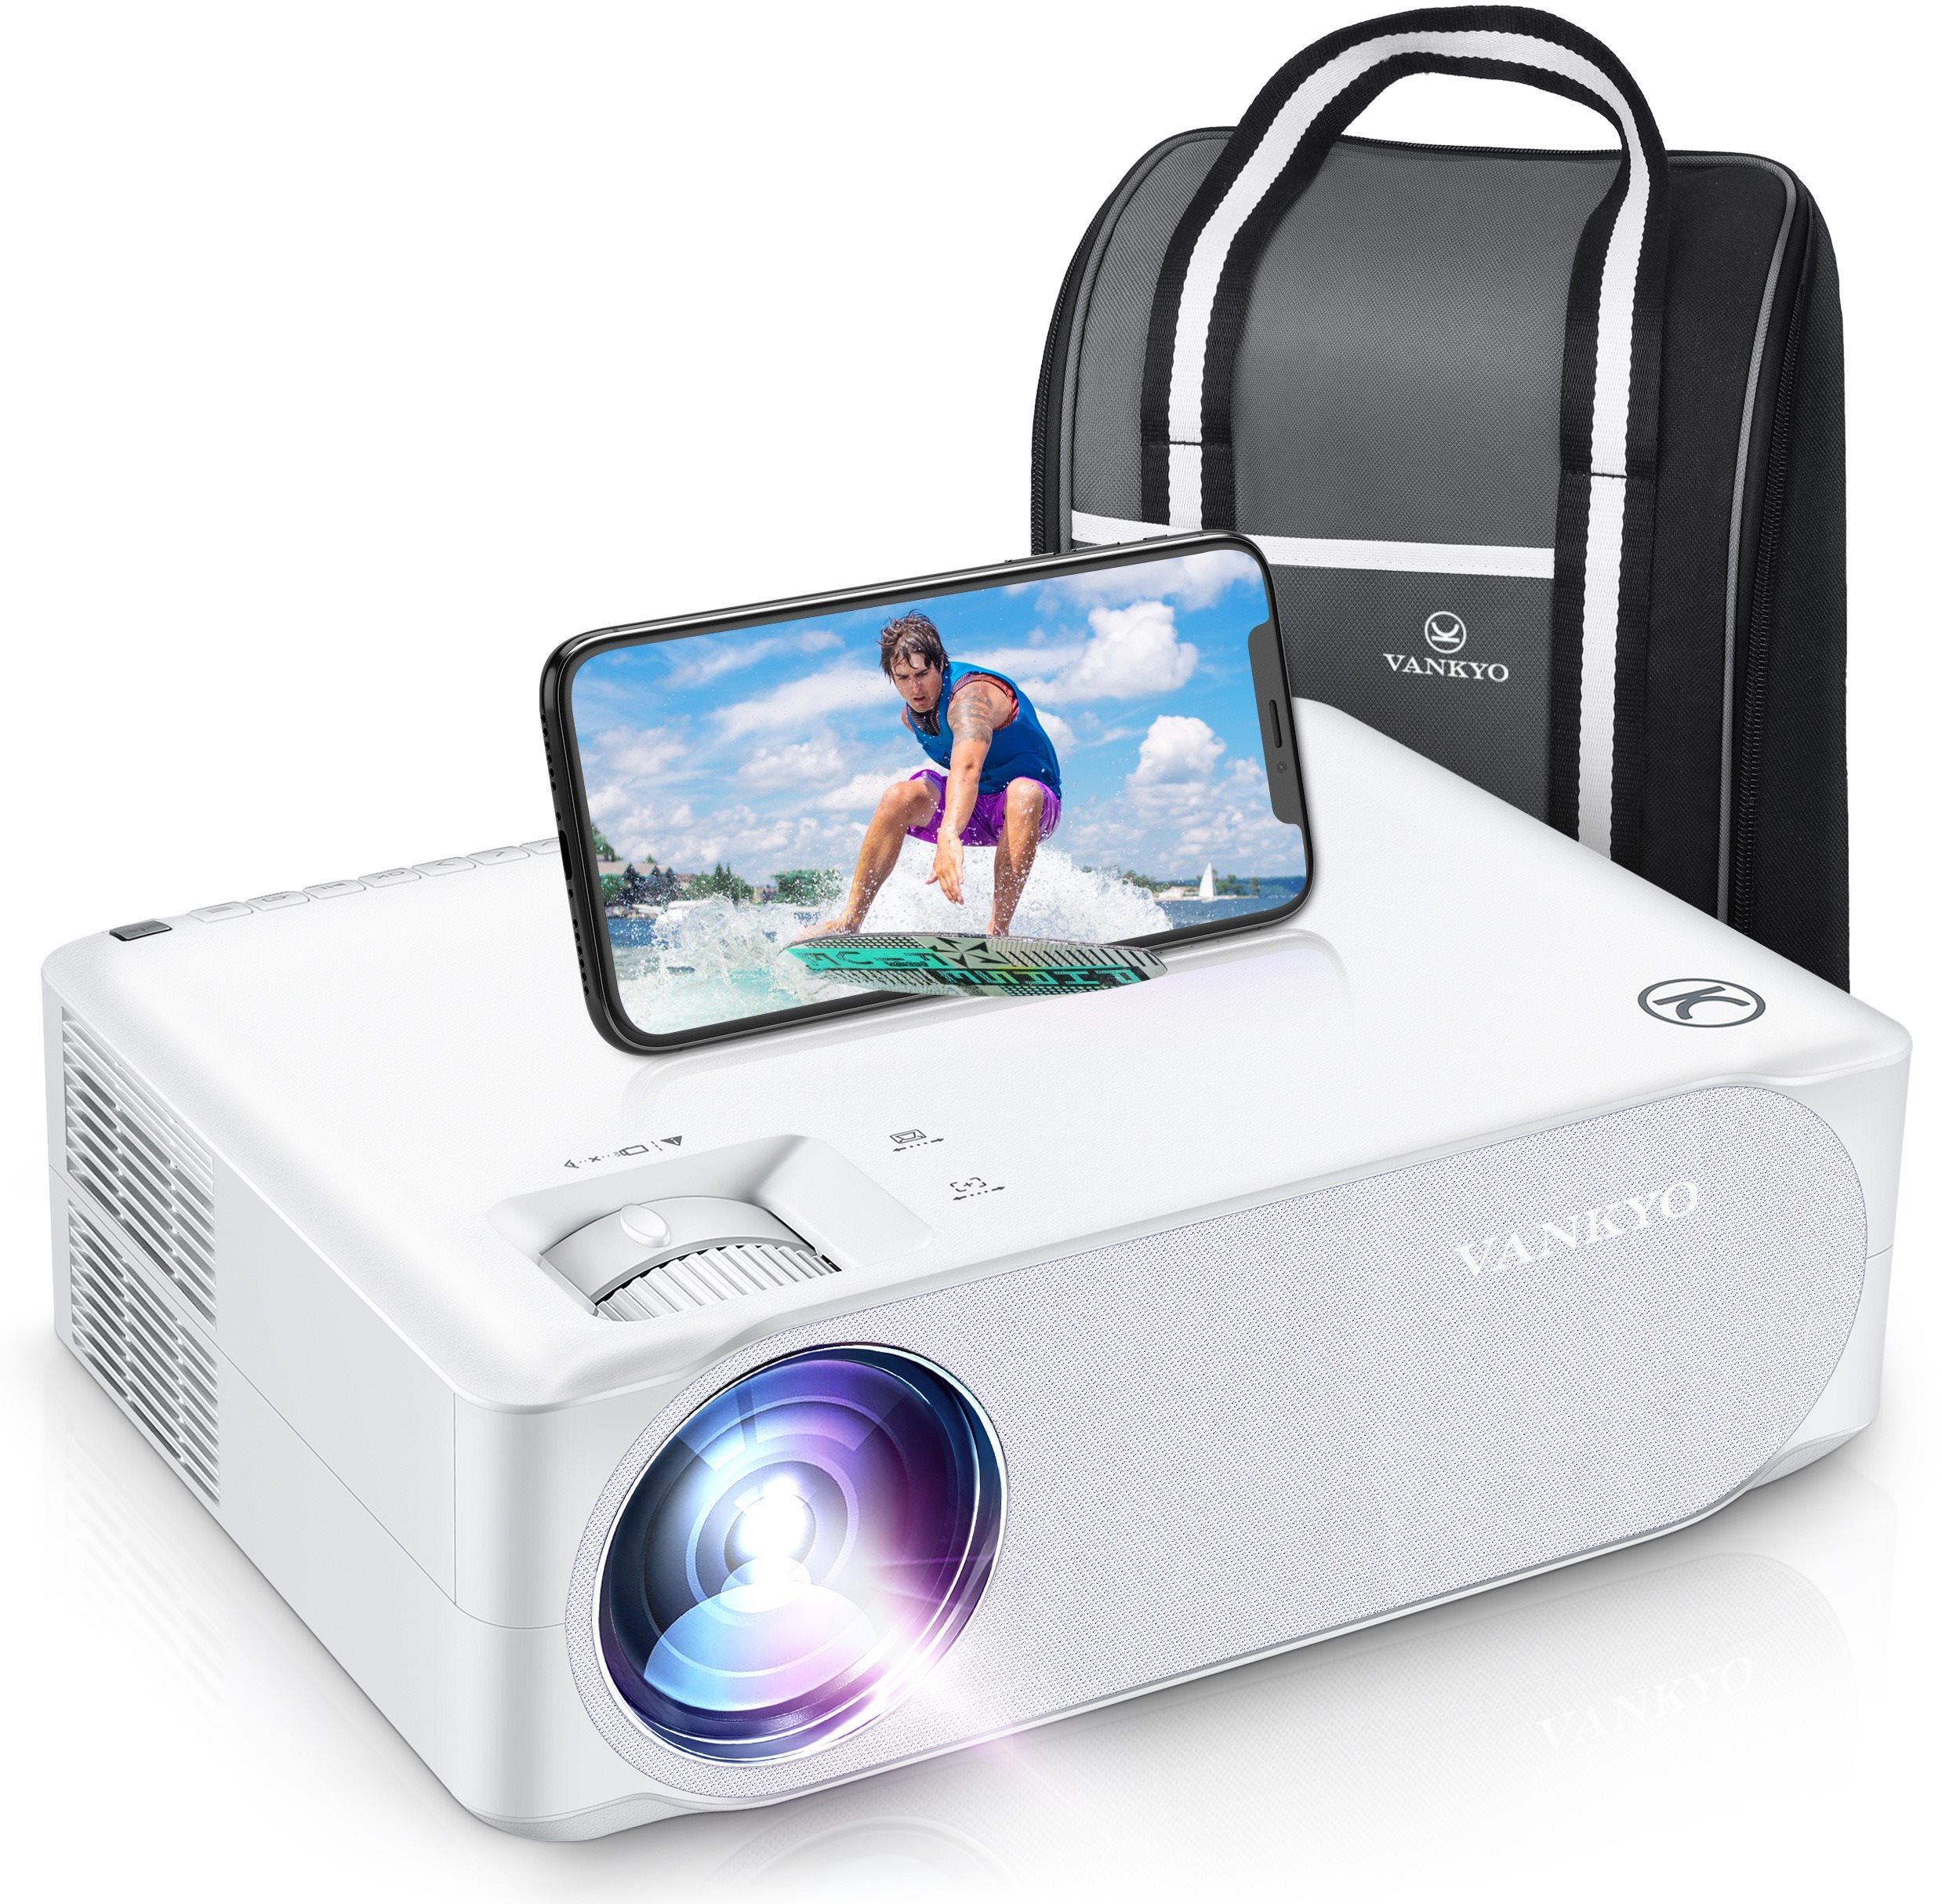 Projector VANKYO PERFORMANCE V630W Lateral view